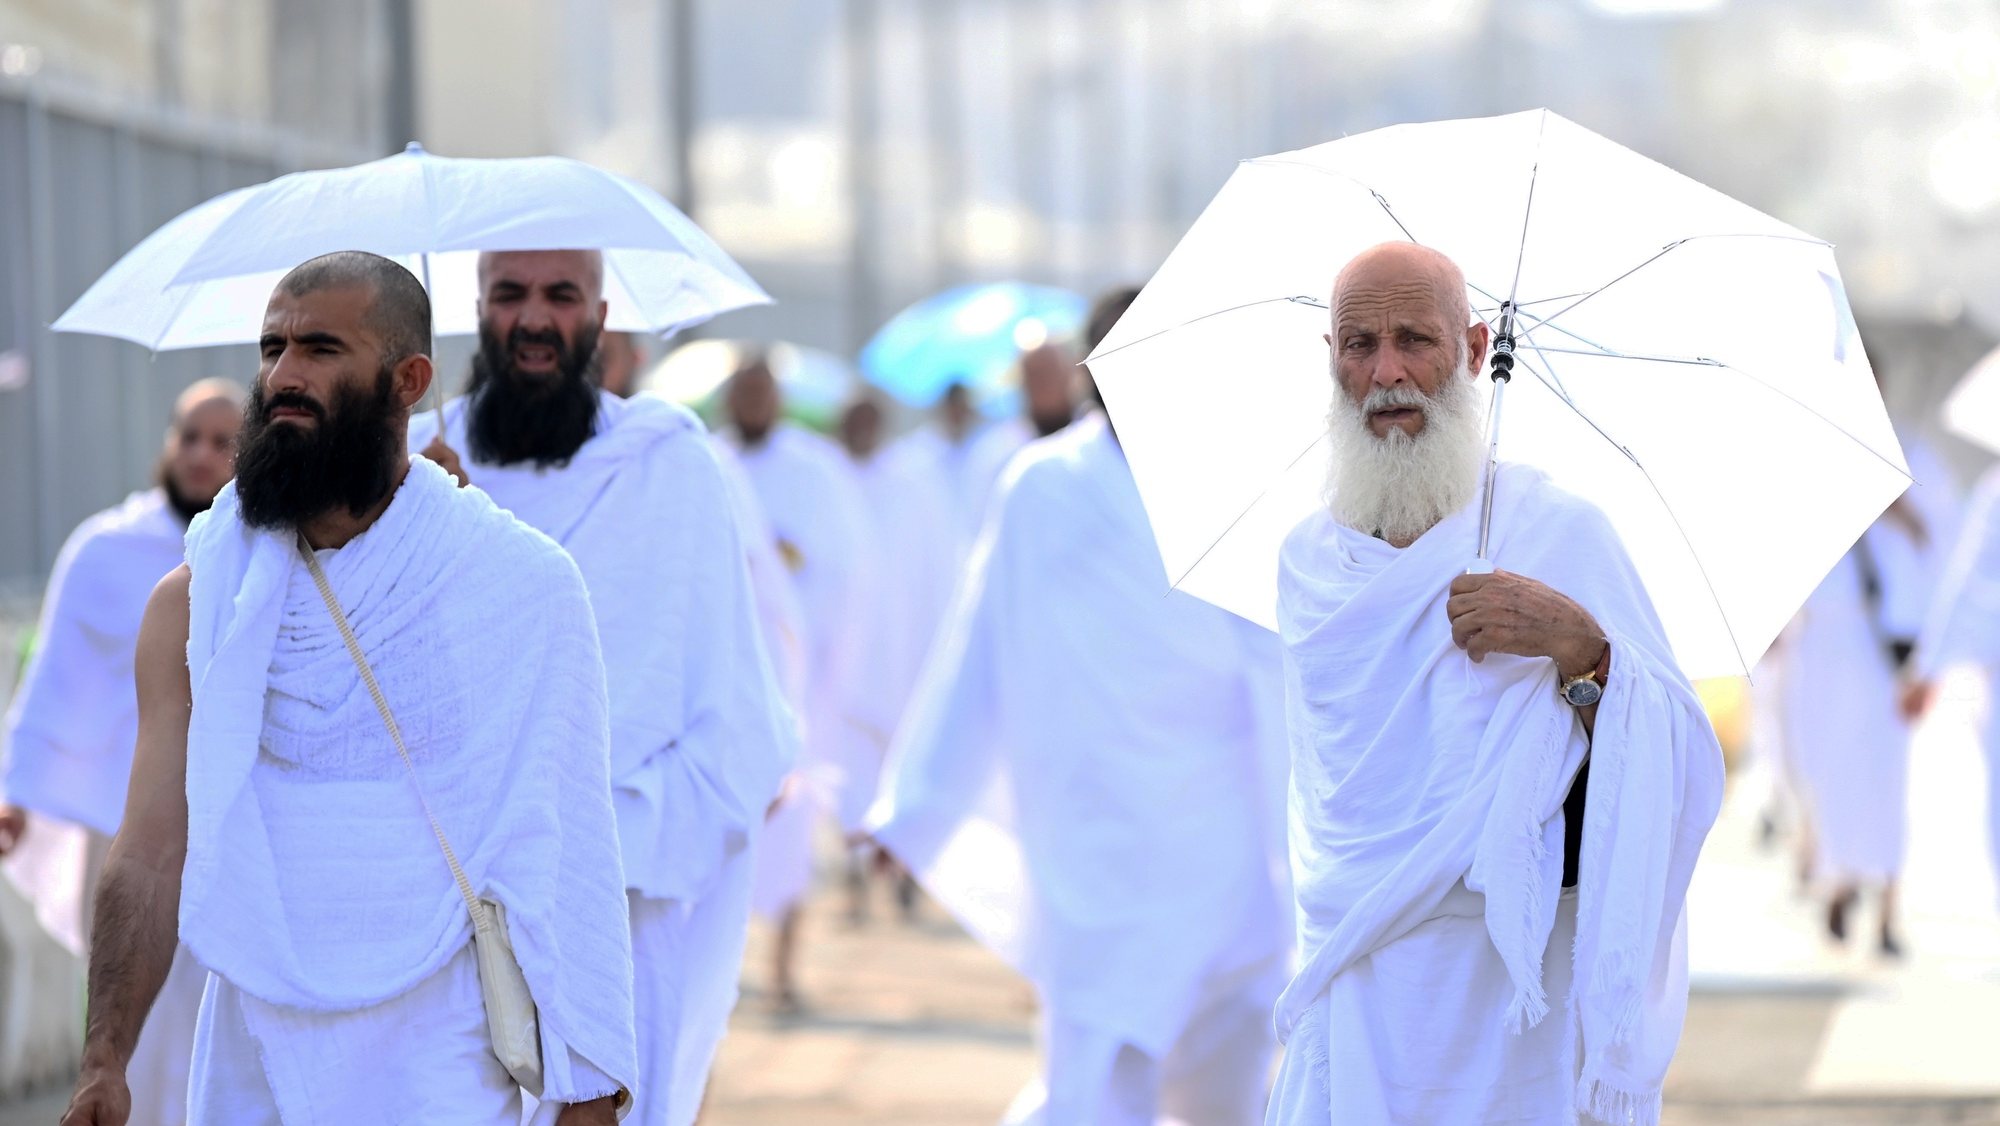 epa11409862 Muslim pilgrims make their way to the Mina tent camp for the start of the Hajj 2024 pilgrimage, in Mecca, Saudi Arabia, 14 June 2024. Pilgrims began arriving in Mina on 14 June for performing the Hajj 2024 rituals, taking place this year from the evening of 14 June until 19 June. Saudi authorities said that over 1.5 million pilgrims are expected in Saudi Arabia for this year&#039;s Hajj season. Muslims attending this year&#039;s Islamic Hajj pilgrimage will face the challenge of a significant rise in temperatures, which poses a threat to the health of pilgrims, according to the Ministry of Health statement, as the National Center for Meteorology (NCM) expected temperatures to range between 45 and 48 degrees Celsius at the holy sites.  EPA/STRINGER